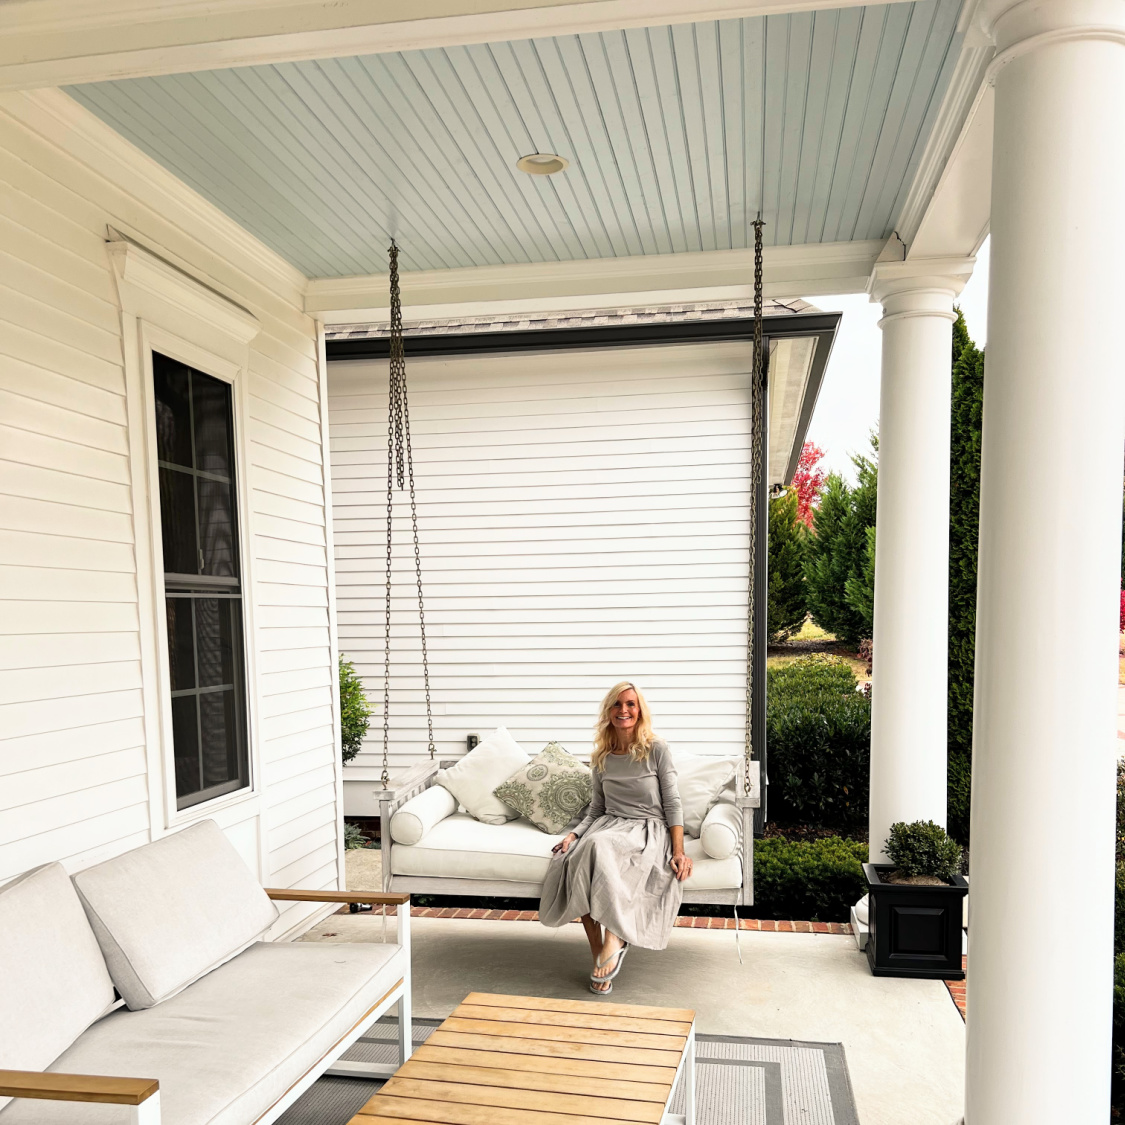 Southern front porch with swing, haint blue ceiling, and Michele of Hello Lovely.